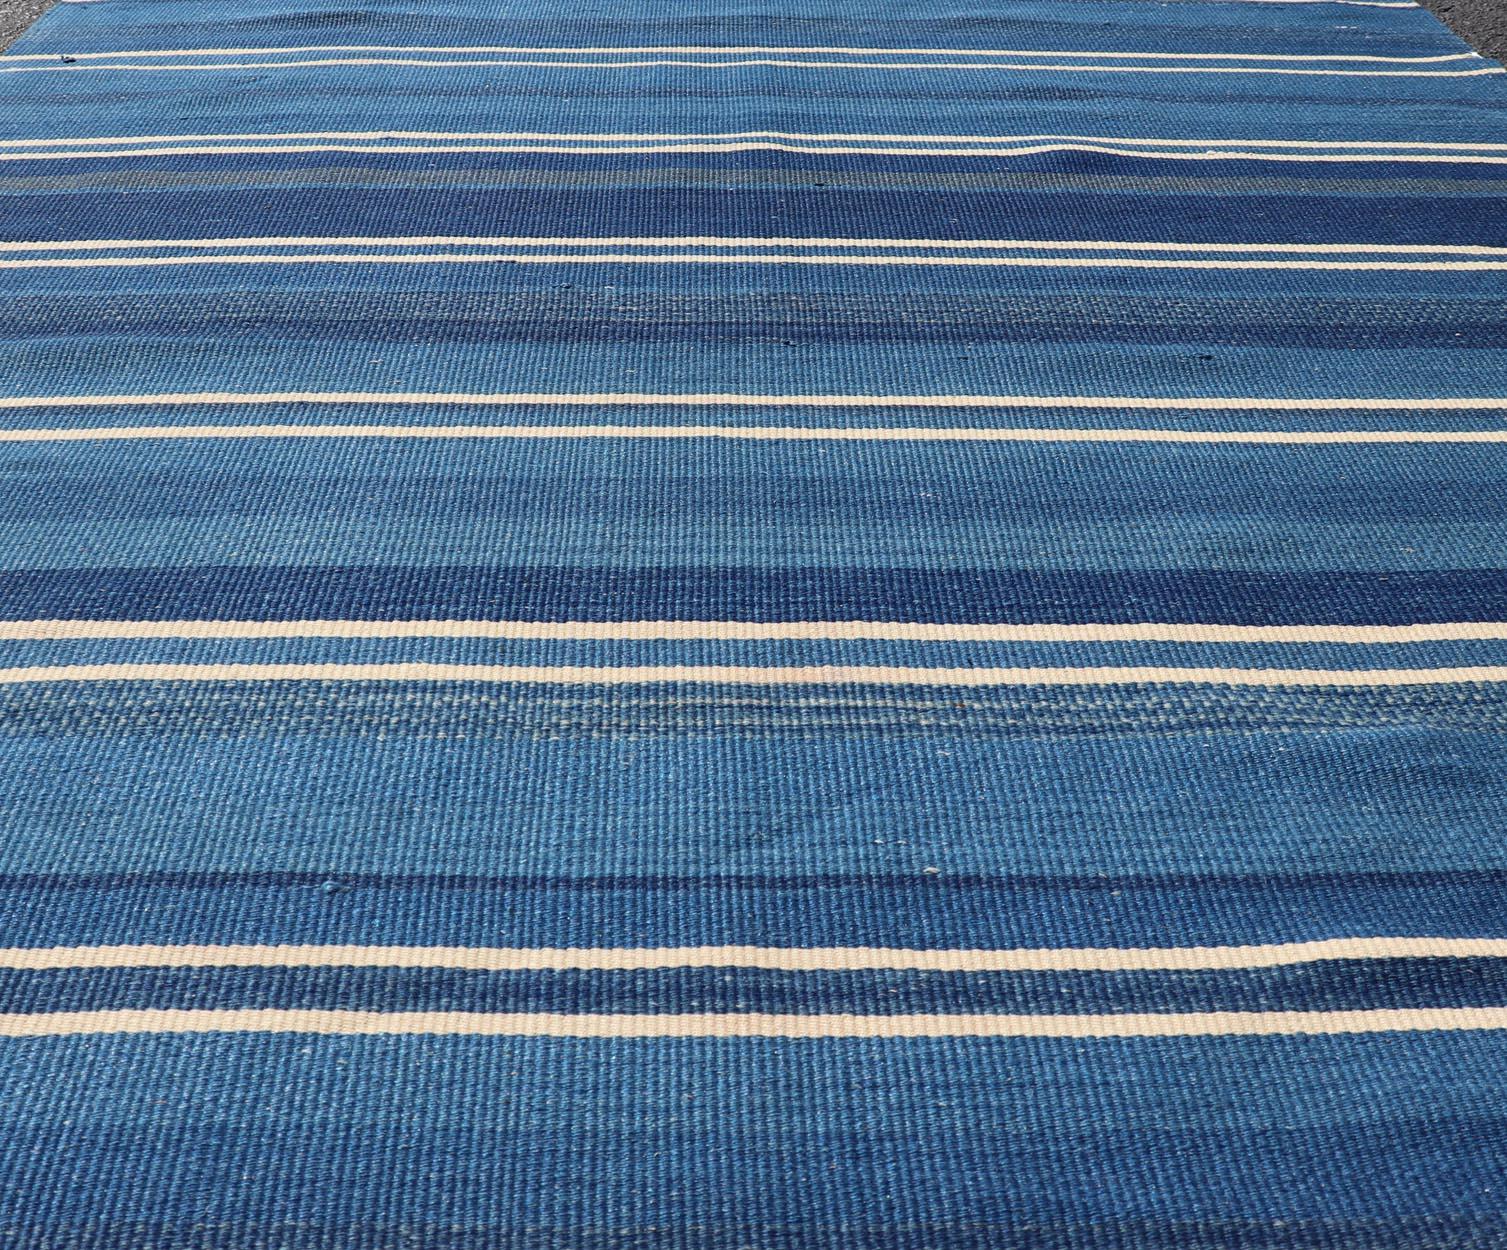 Hand-Woven Turkish Flat-Weave Kilim in Navy Blue and Ivory in Striped Design For Sale